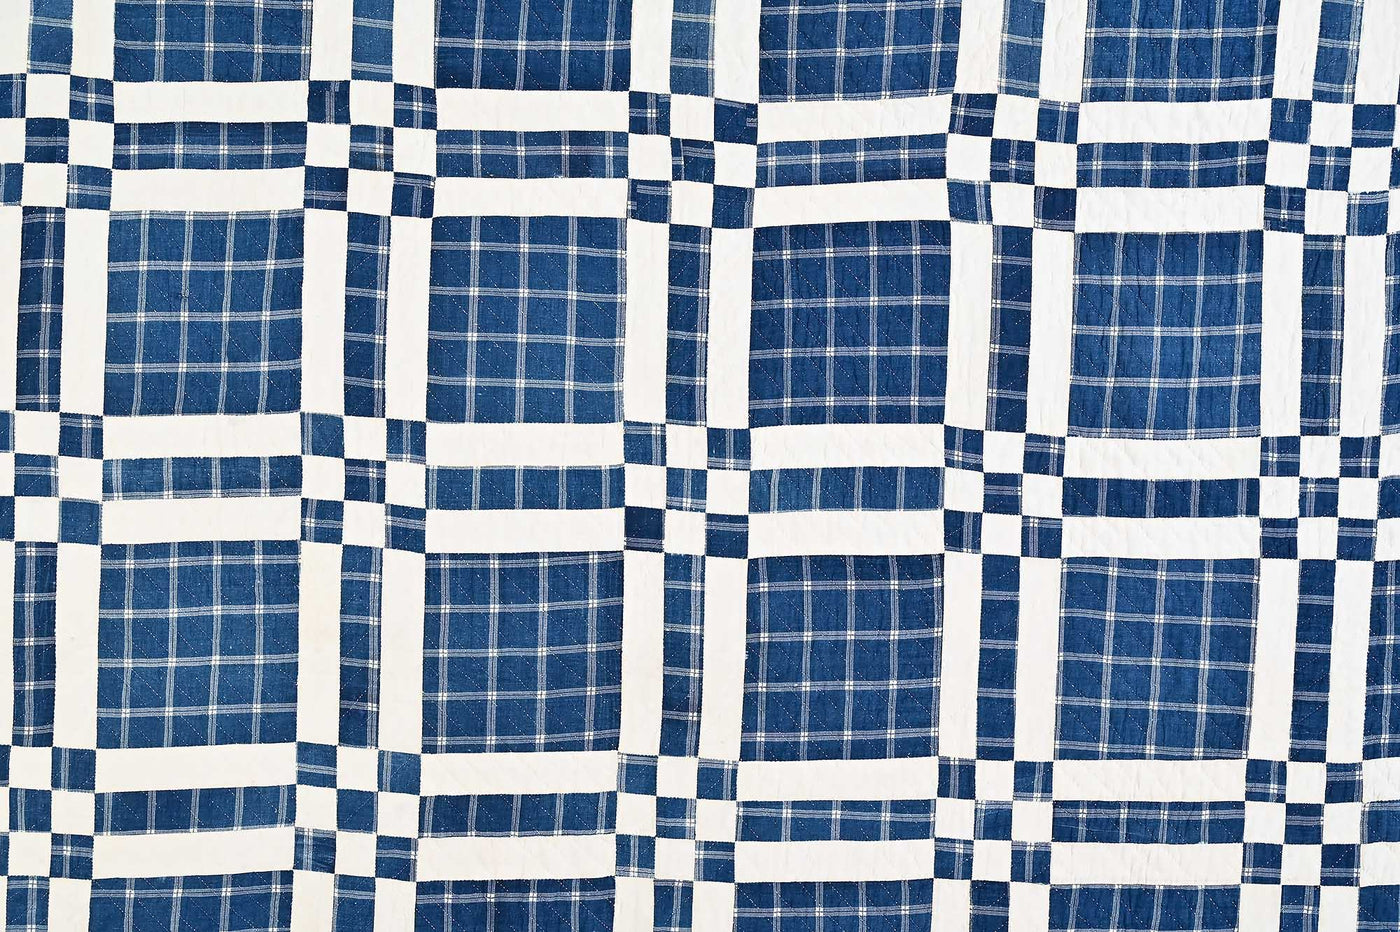 early-windowpane-nine-patch-quilt-1452020-center-closeup-detail-2